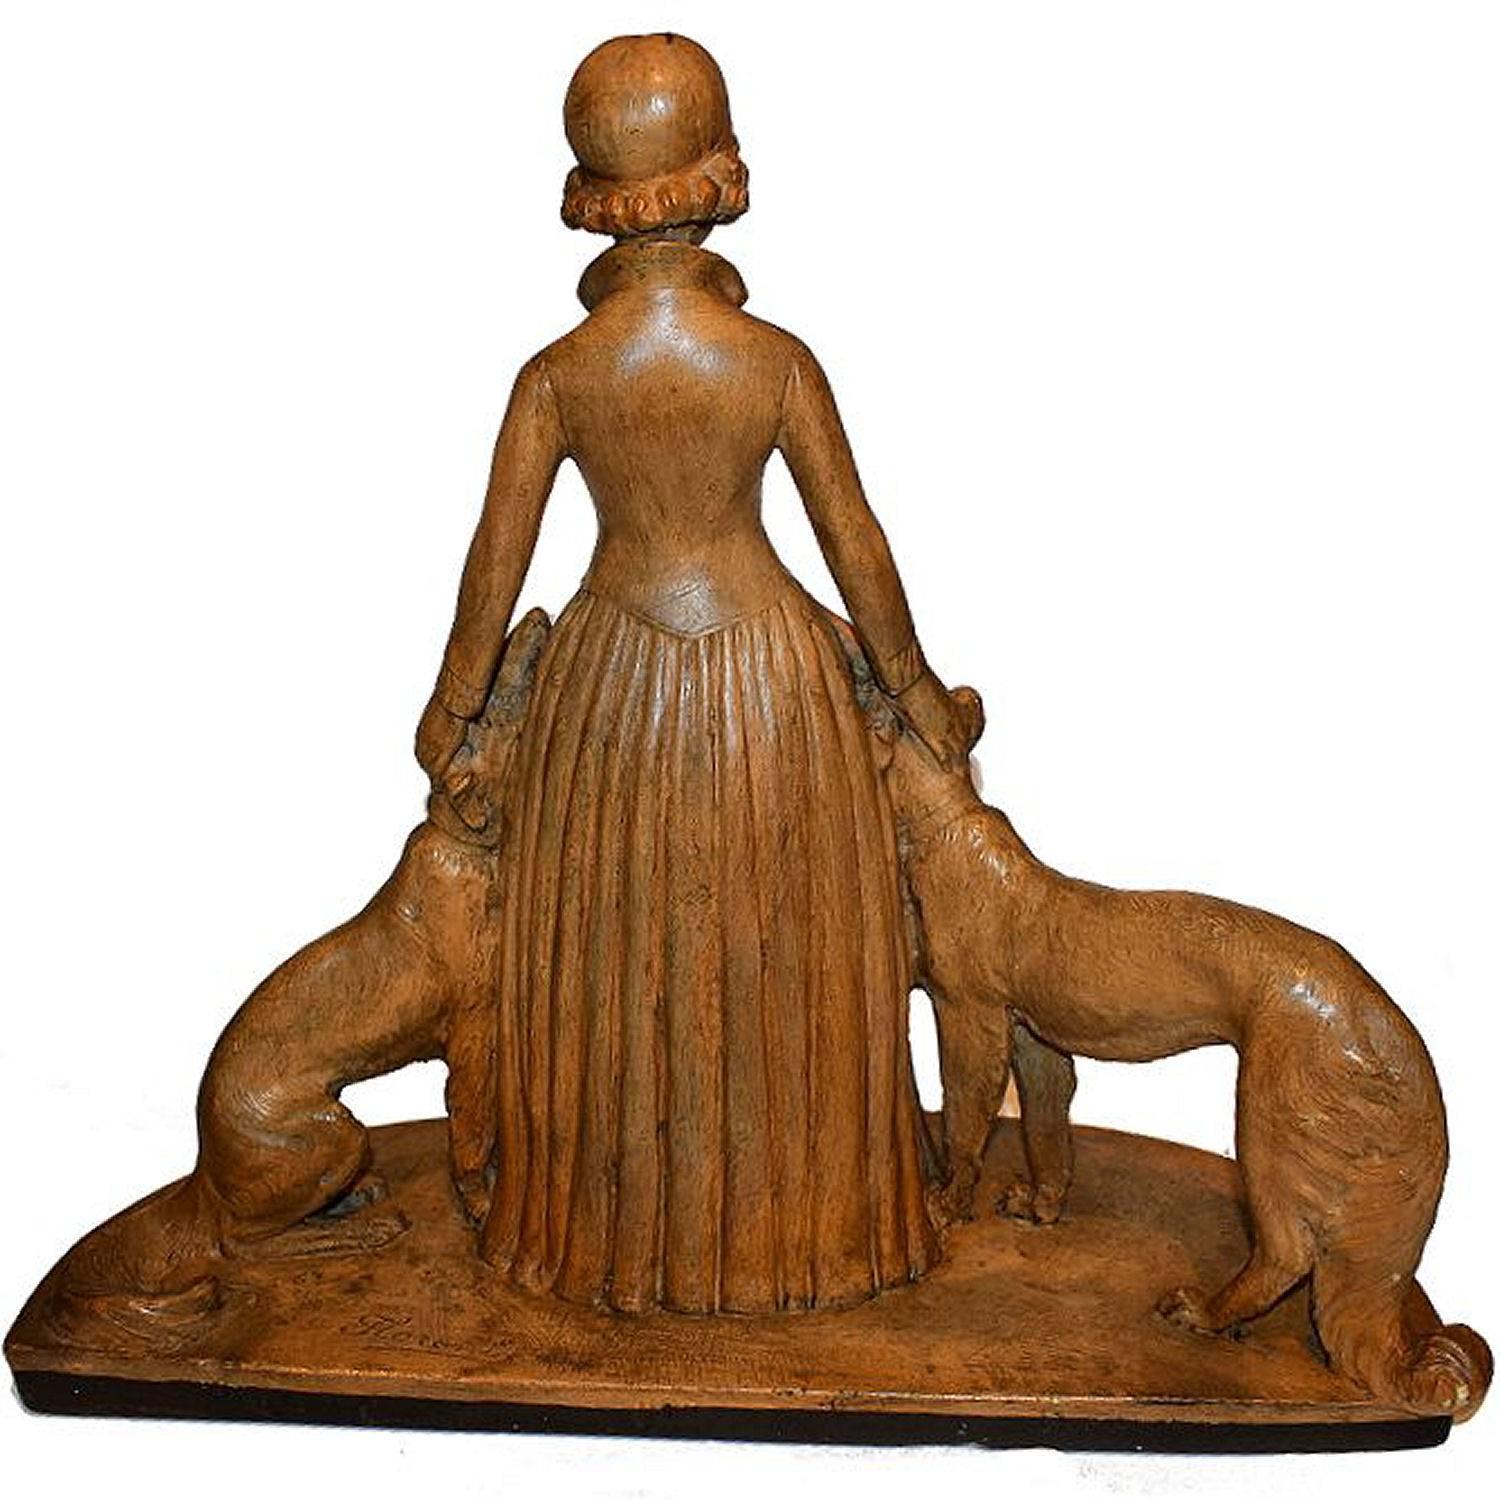 Beautiful Art Deco statue signed by the sculptor FLORENT CF PARIS, which depicts a woman with greyhounds. Wonderful colouring and detailing. She appears to be made from terracotta or some type of ceramic. The condition is excellent, with the most